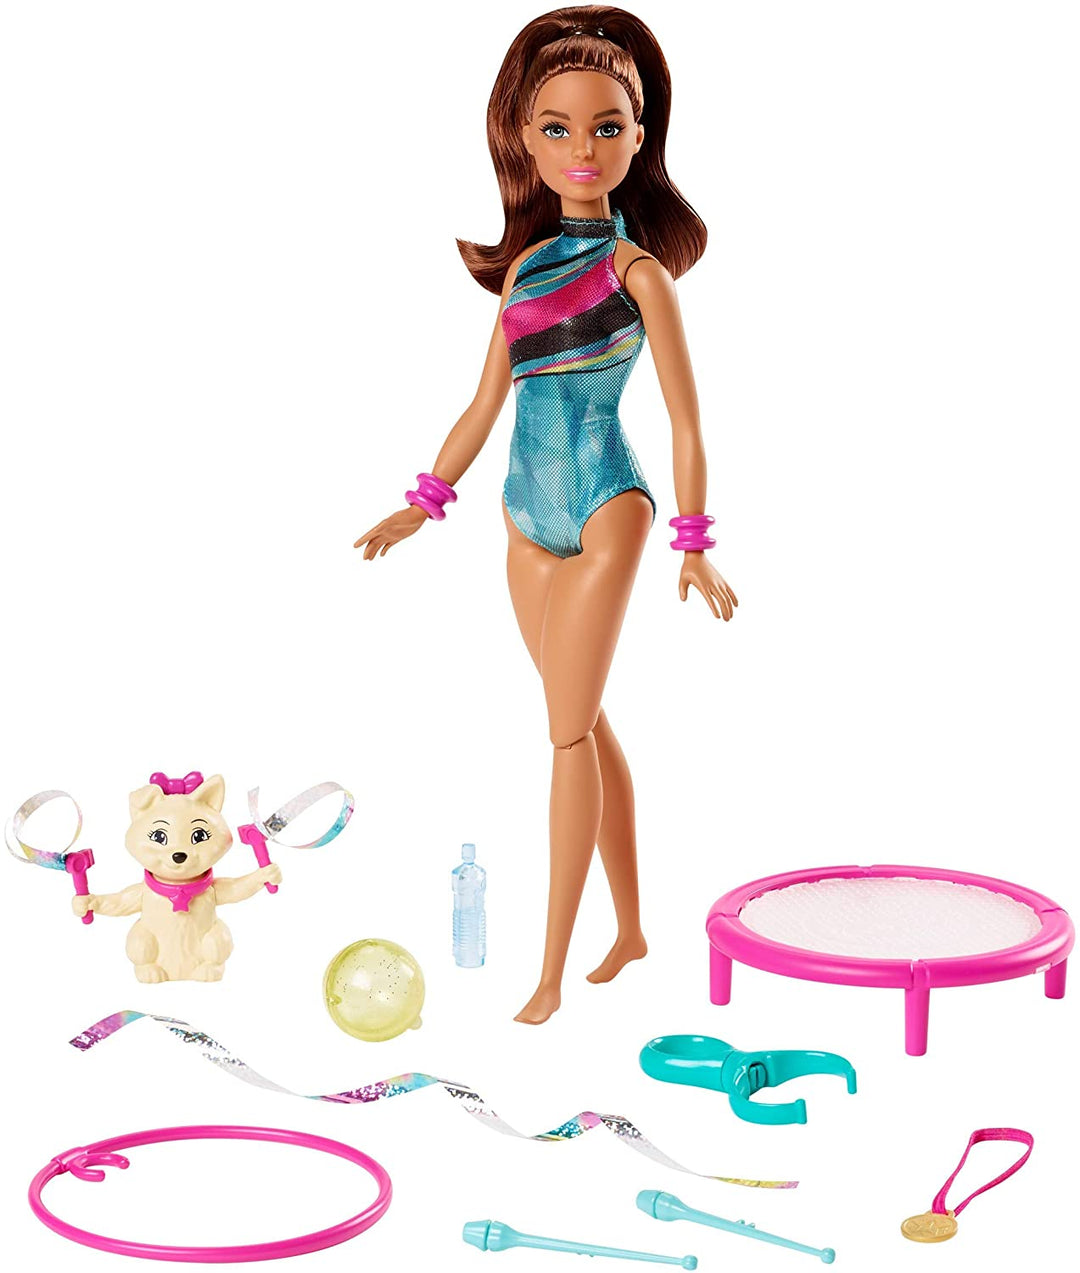 Barbie GHK24 Dreamhouse Adventures Spin ‘n Twirl Gymnast Doll and Accessories